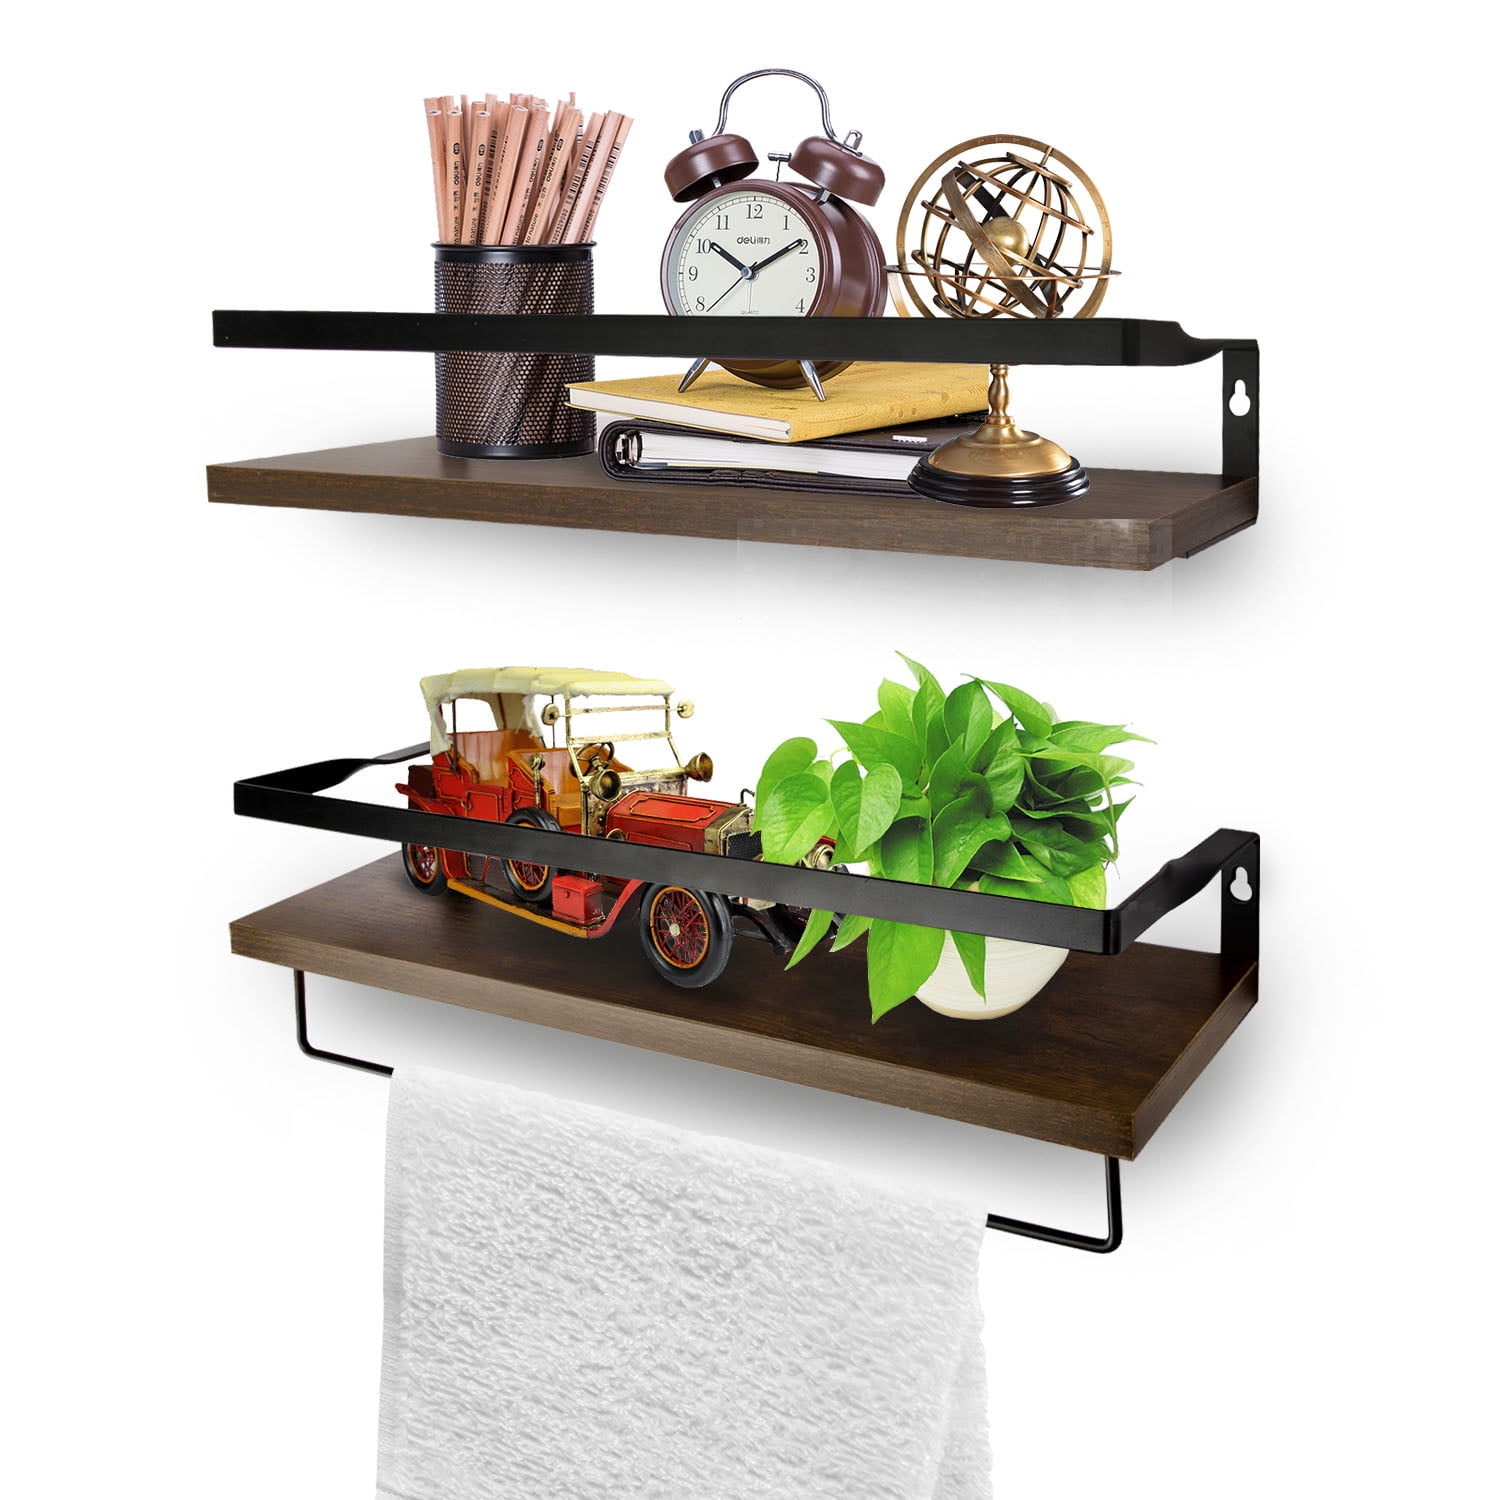 Dracelo 16.14 in. W x 6 in. D x 3 in. H Black 2+1 Tier Bathroom Wall  Mounted Floating Shelves with Metal Frame B09SKGTQ2Q - The Home Depot